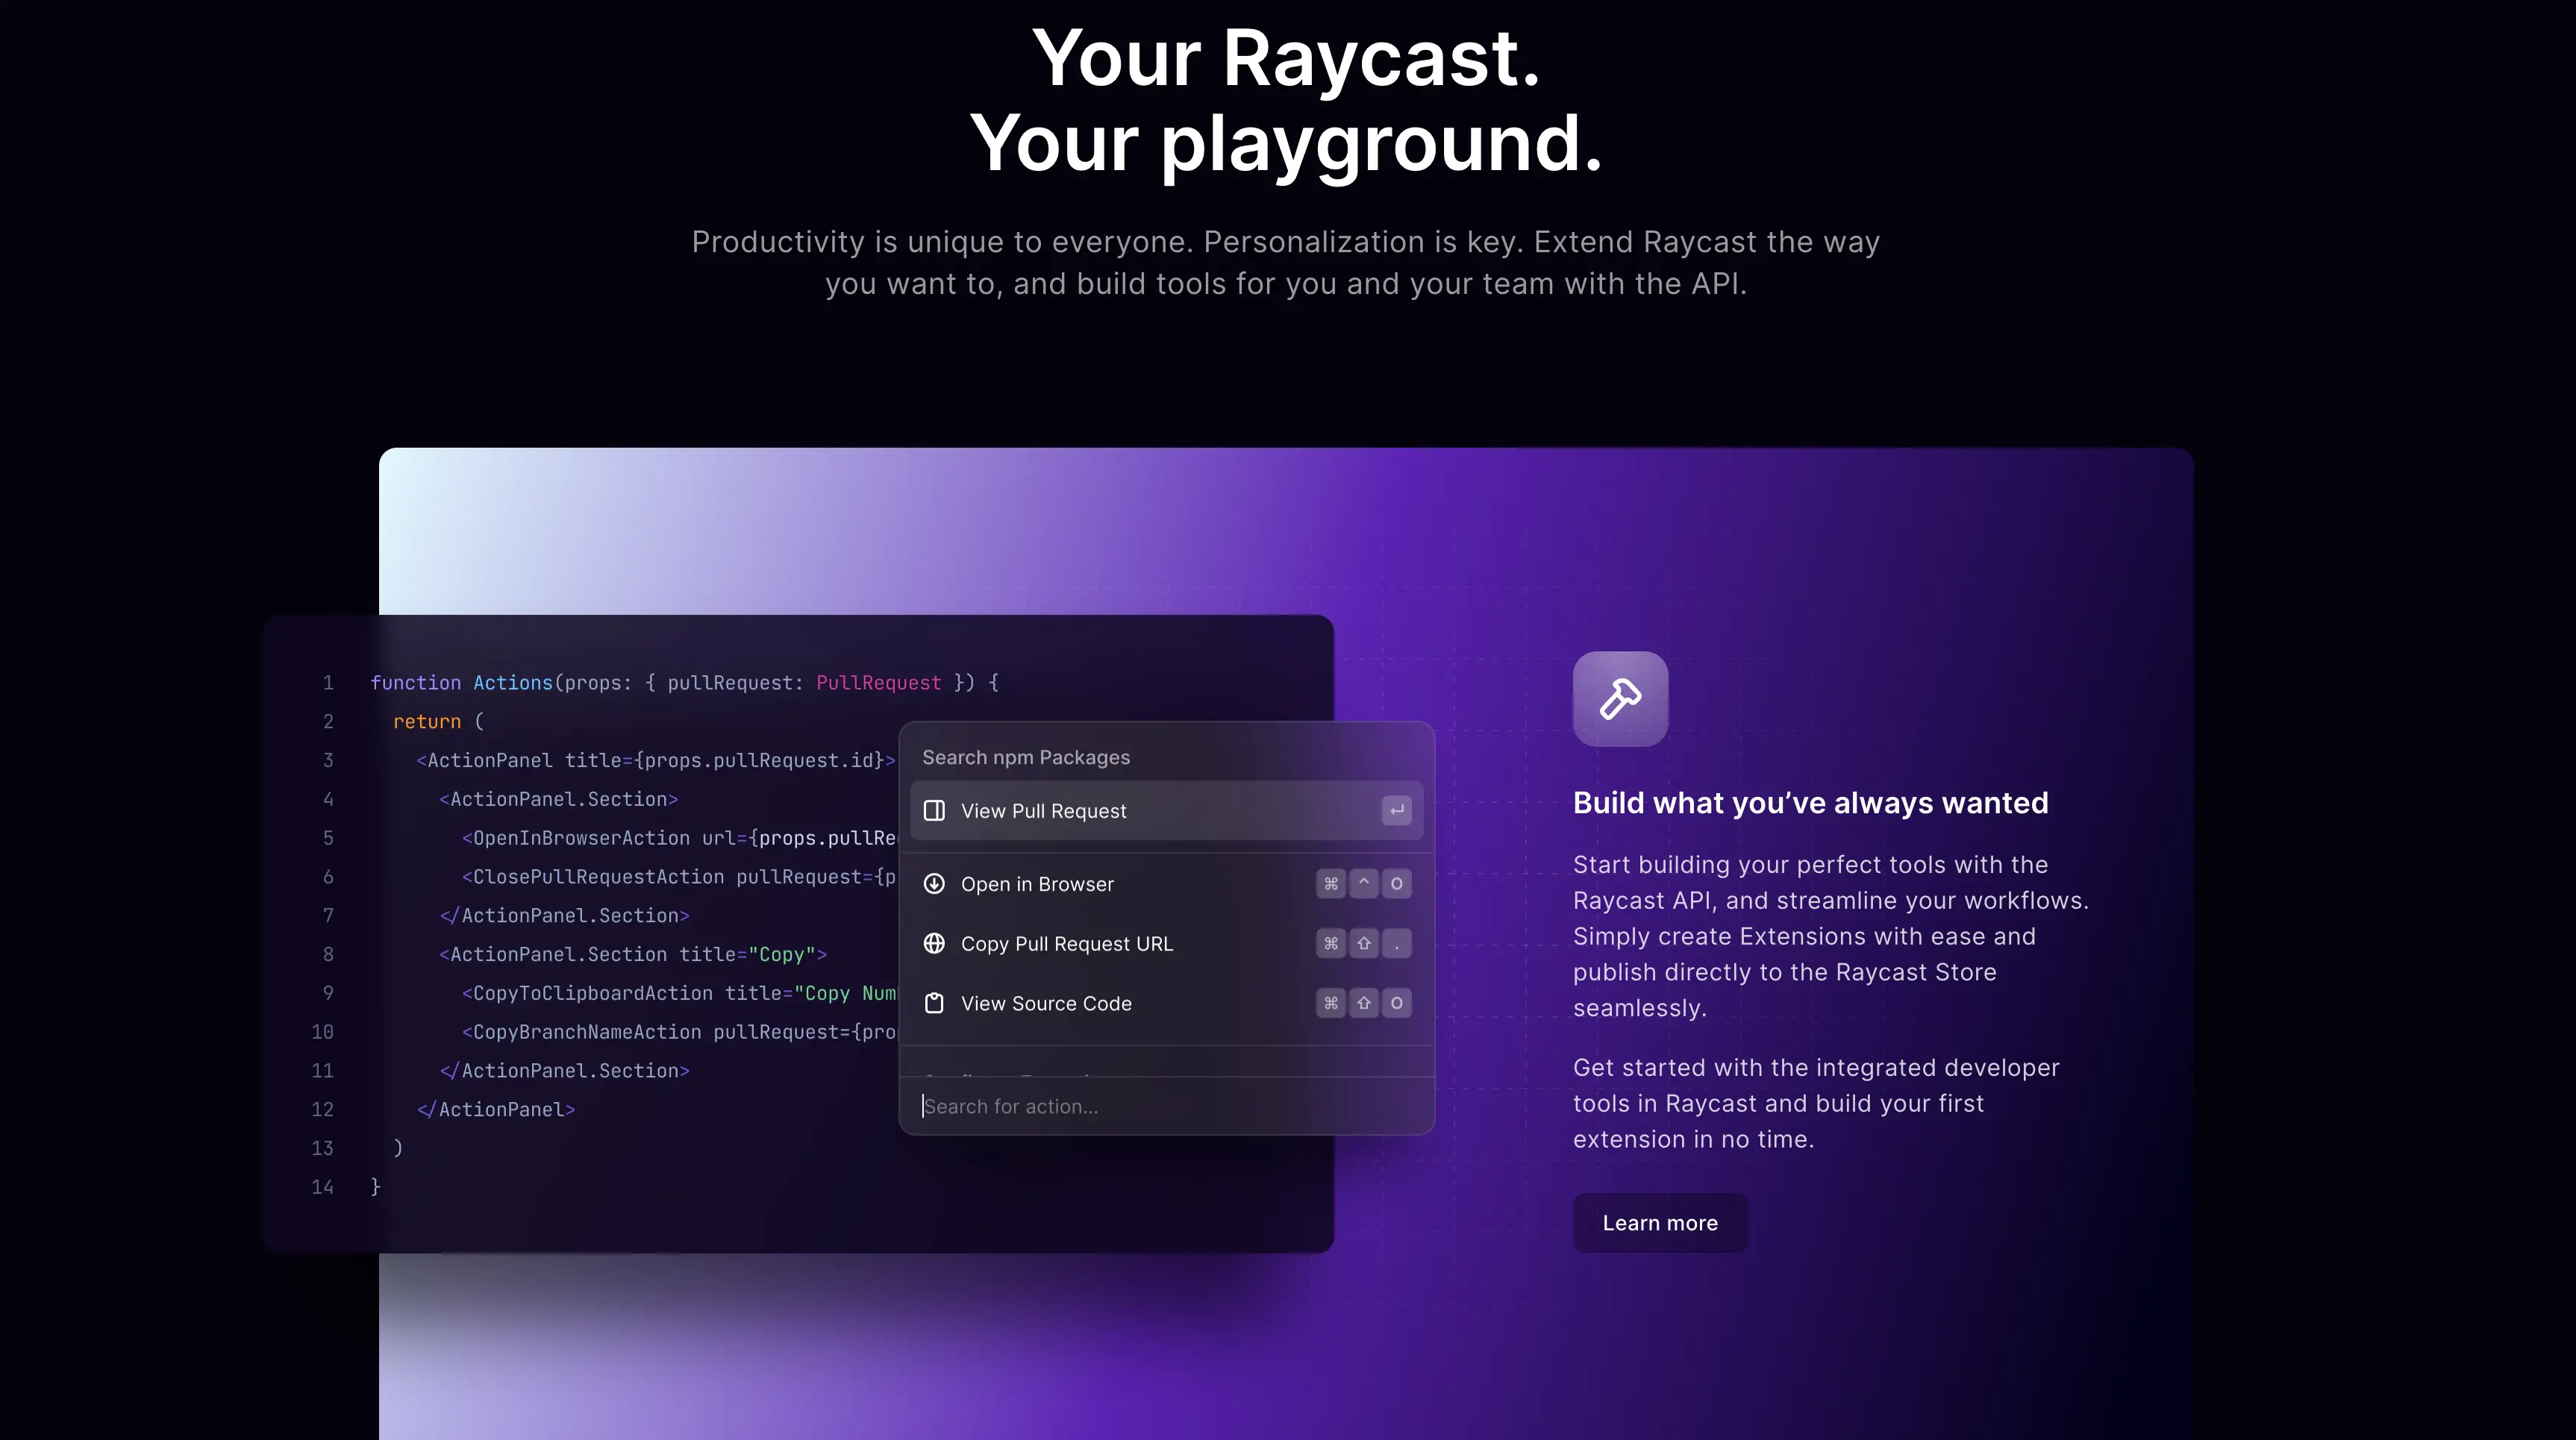 Screenshot of some gradients from raycast.com